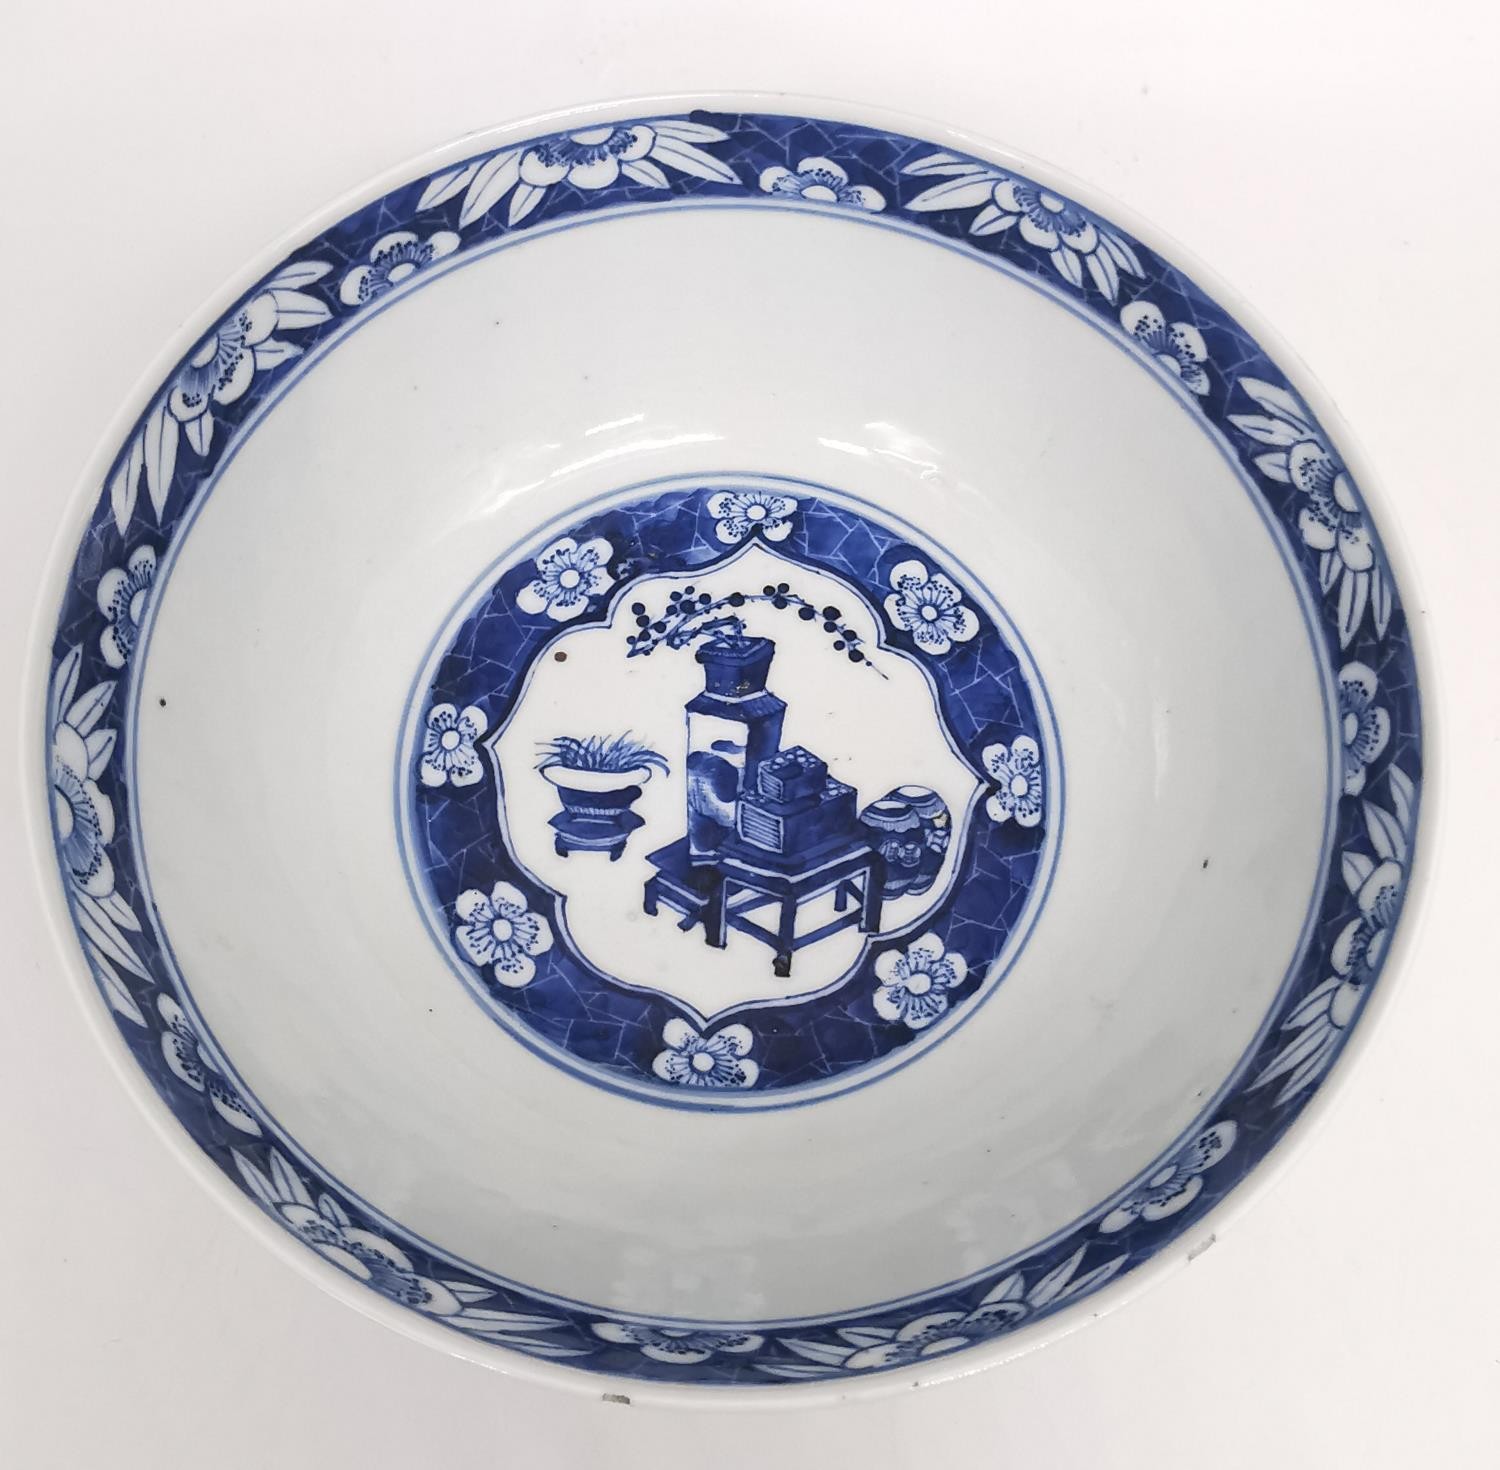 A 19th century Chinese blue and white porcelain footed large bowl with hand painted precious objects